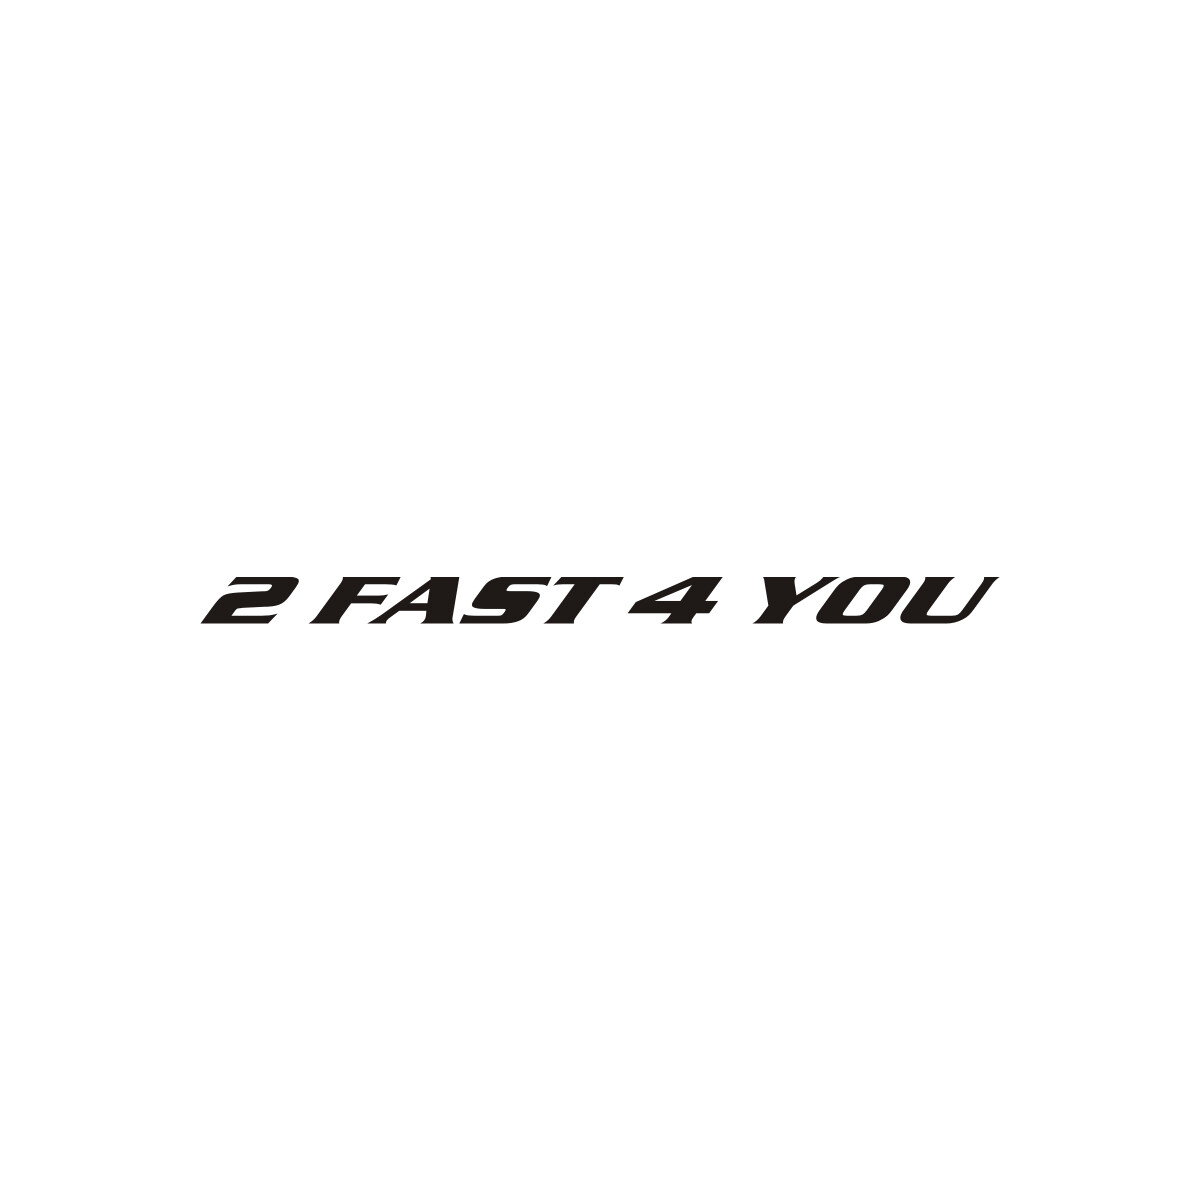 2 FAST 4 YOU sticker (available in different colors) Black